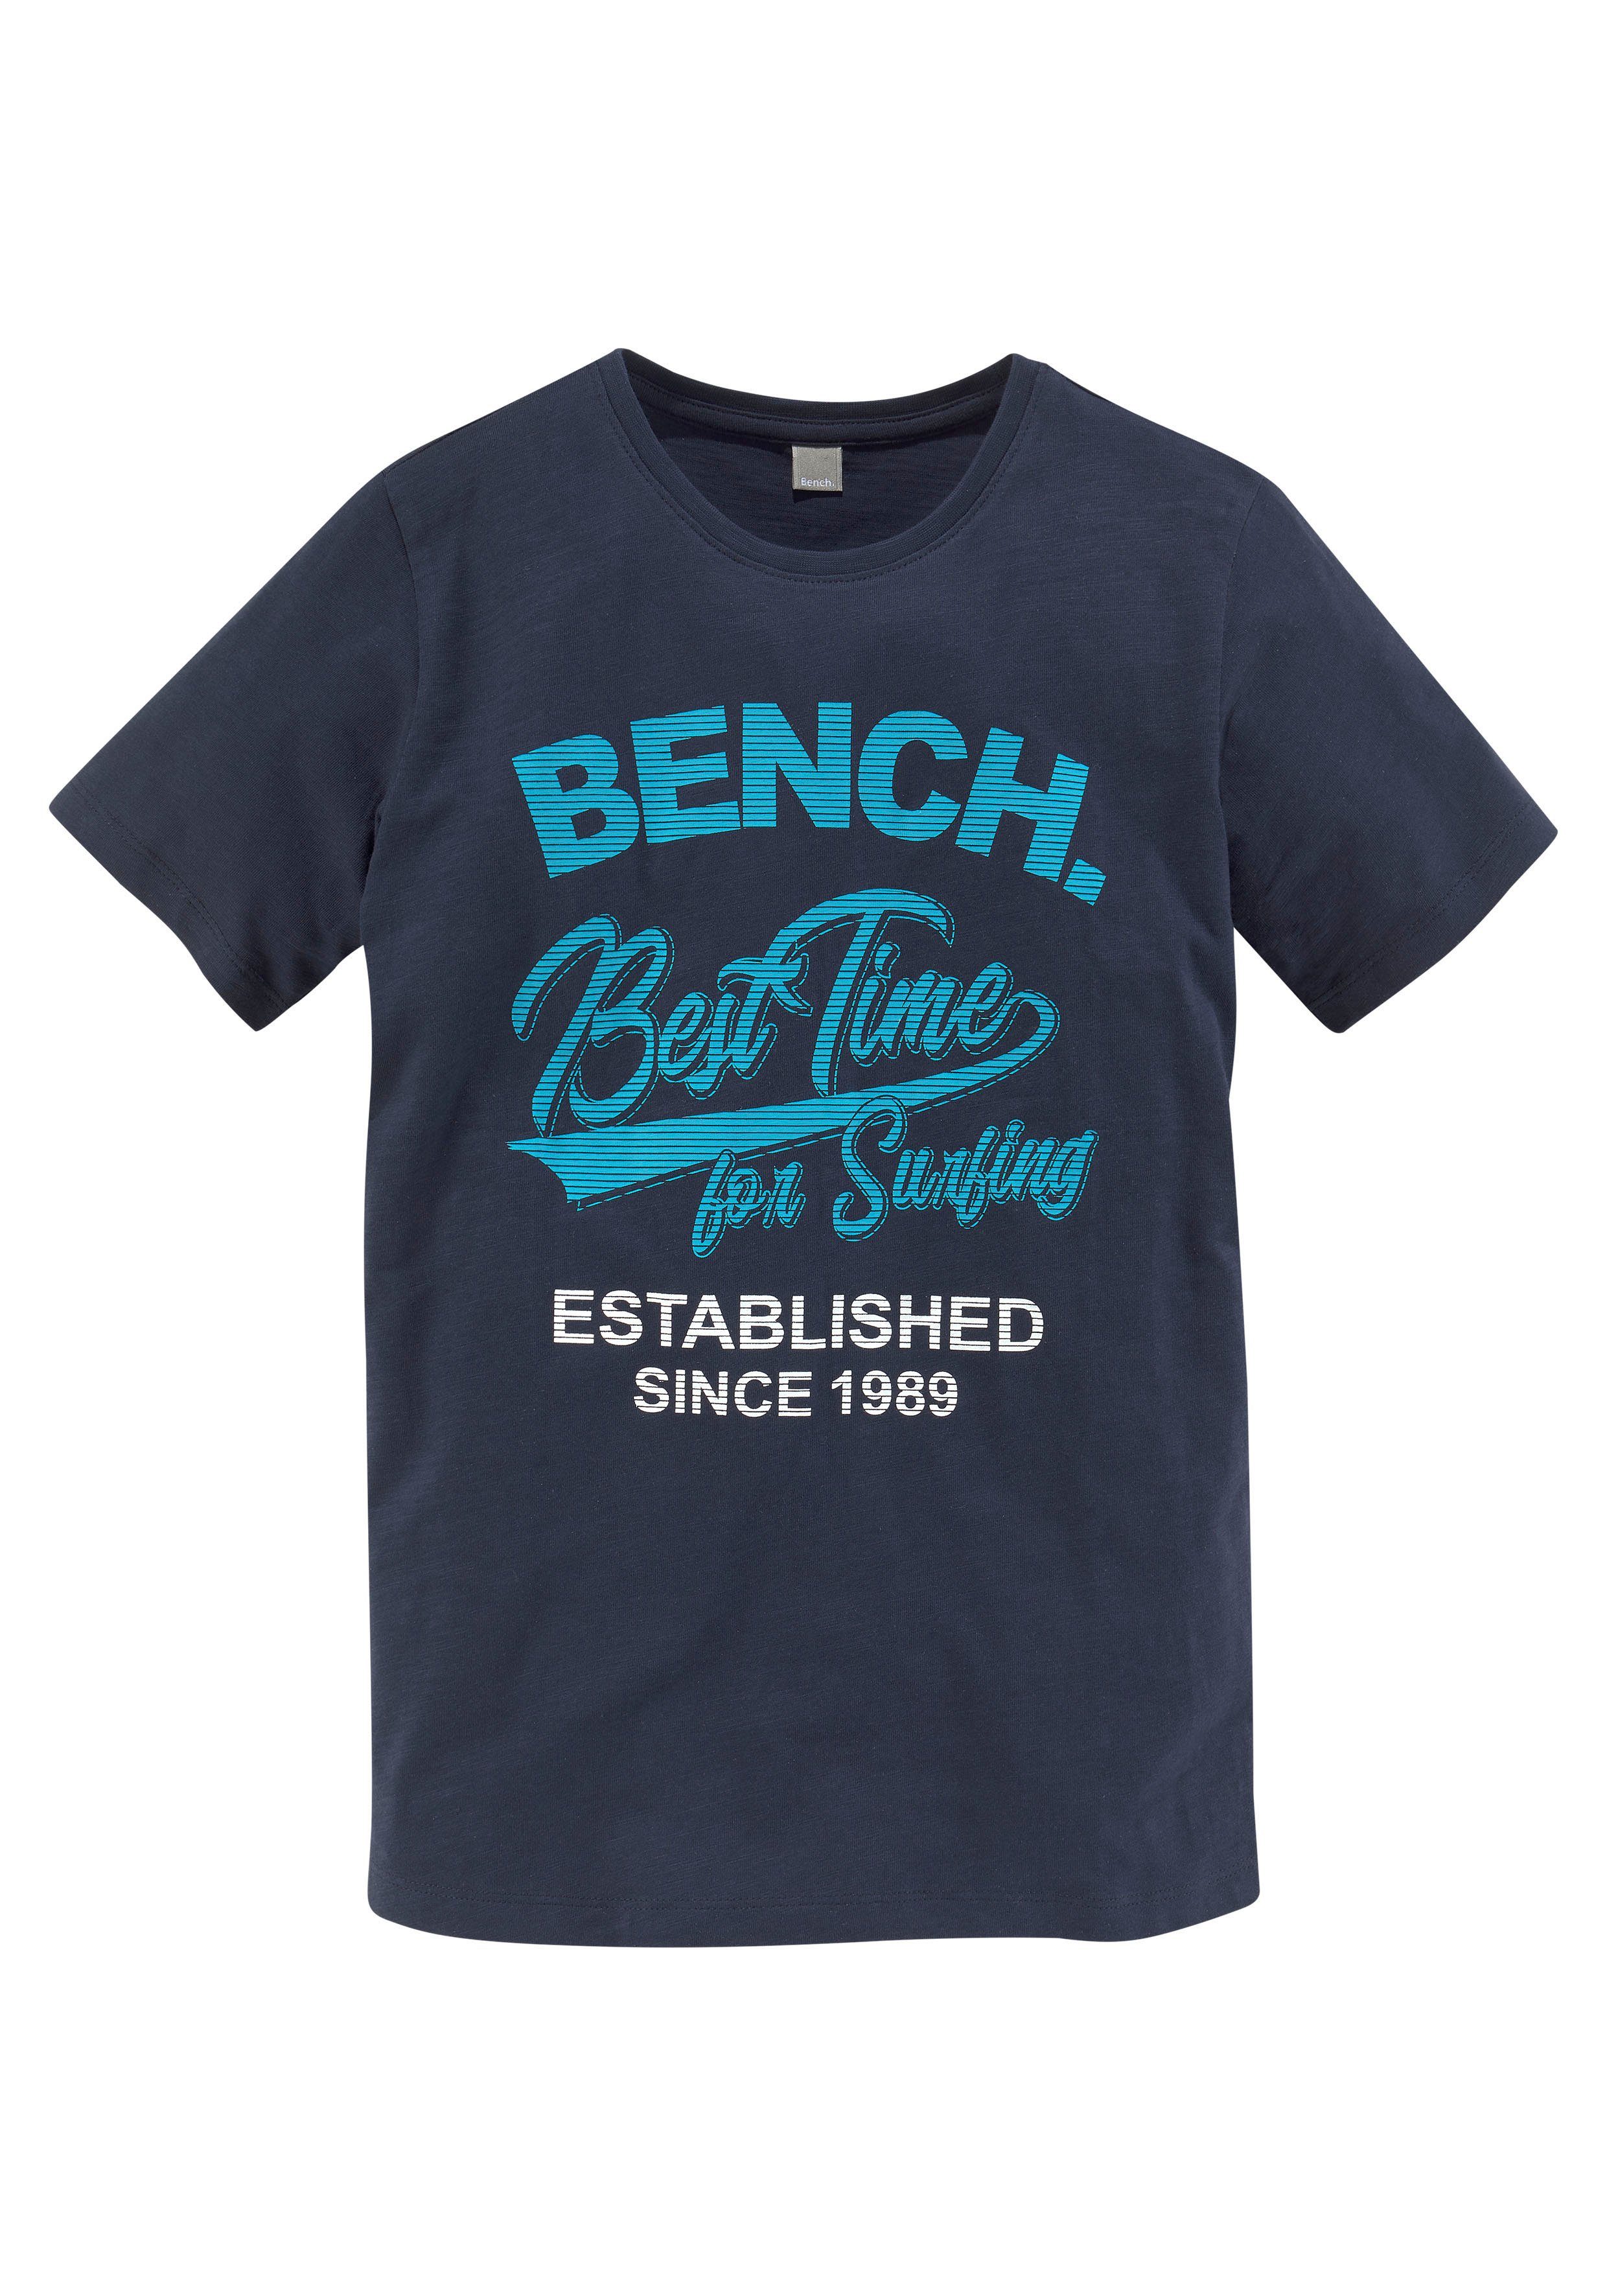 T-Shirt time Best for surfing Bench.